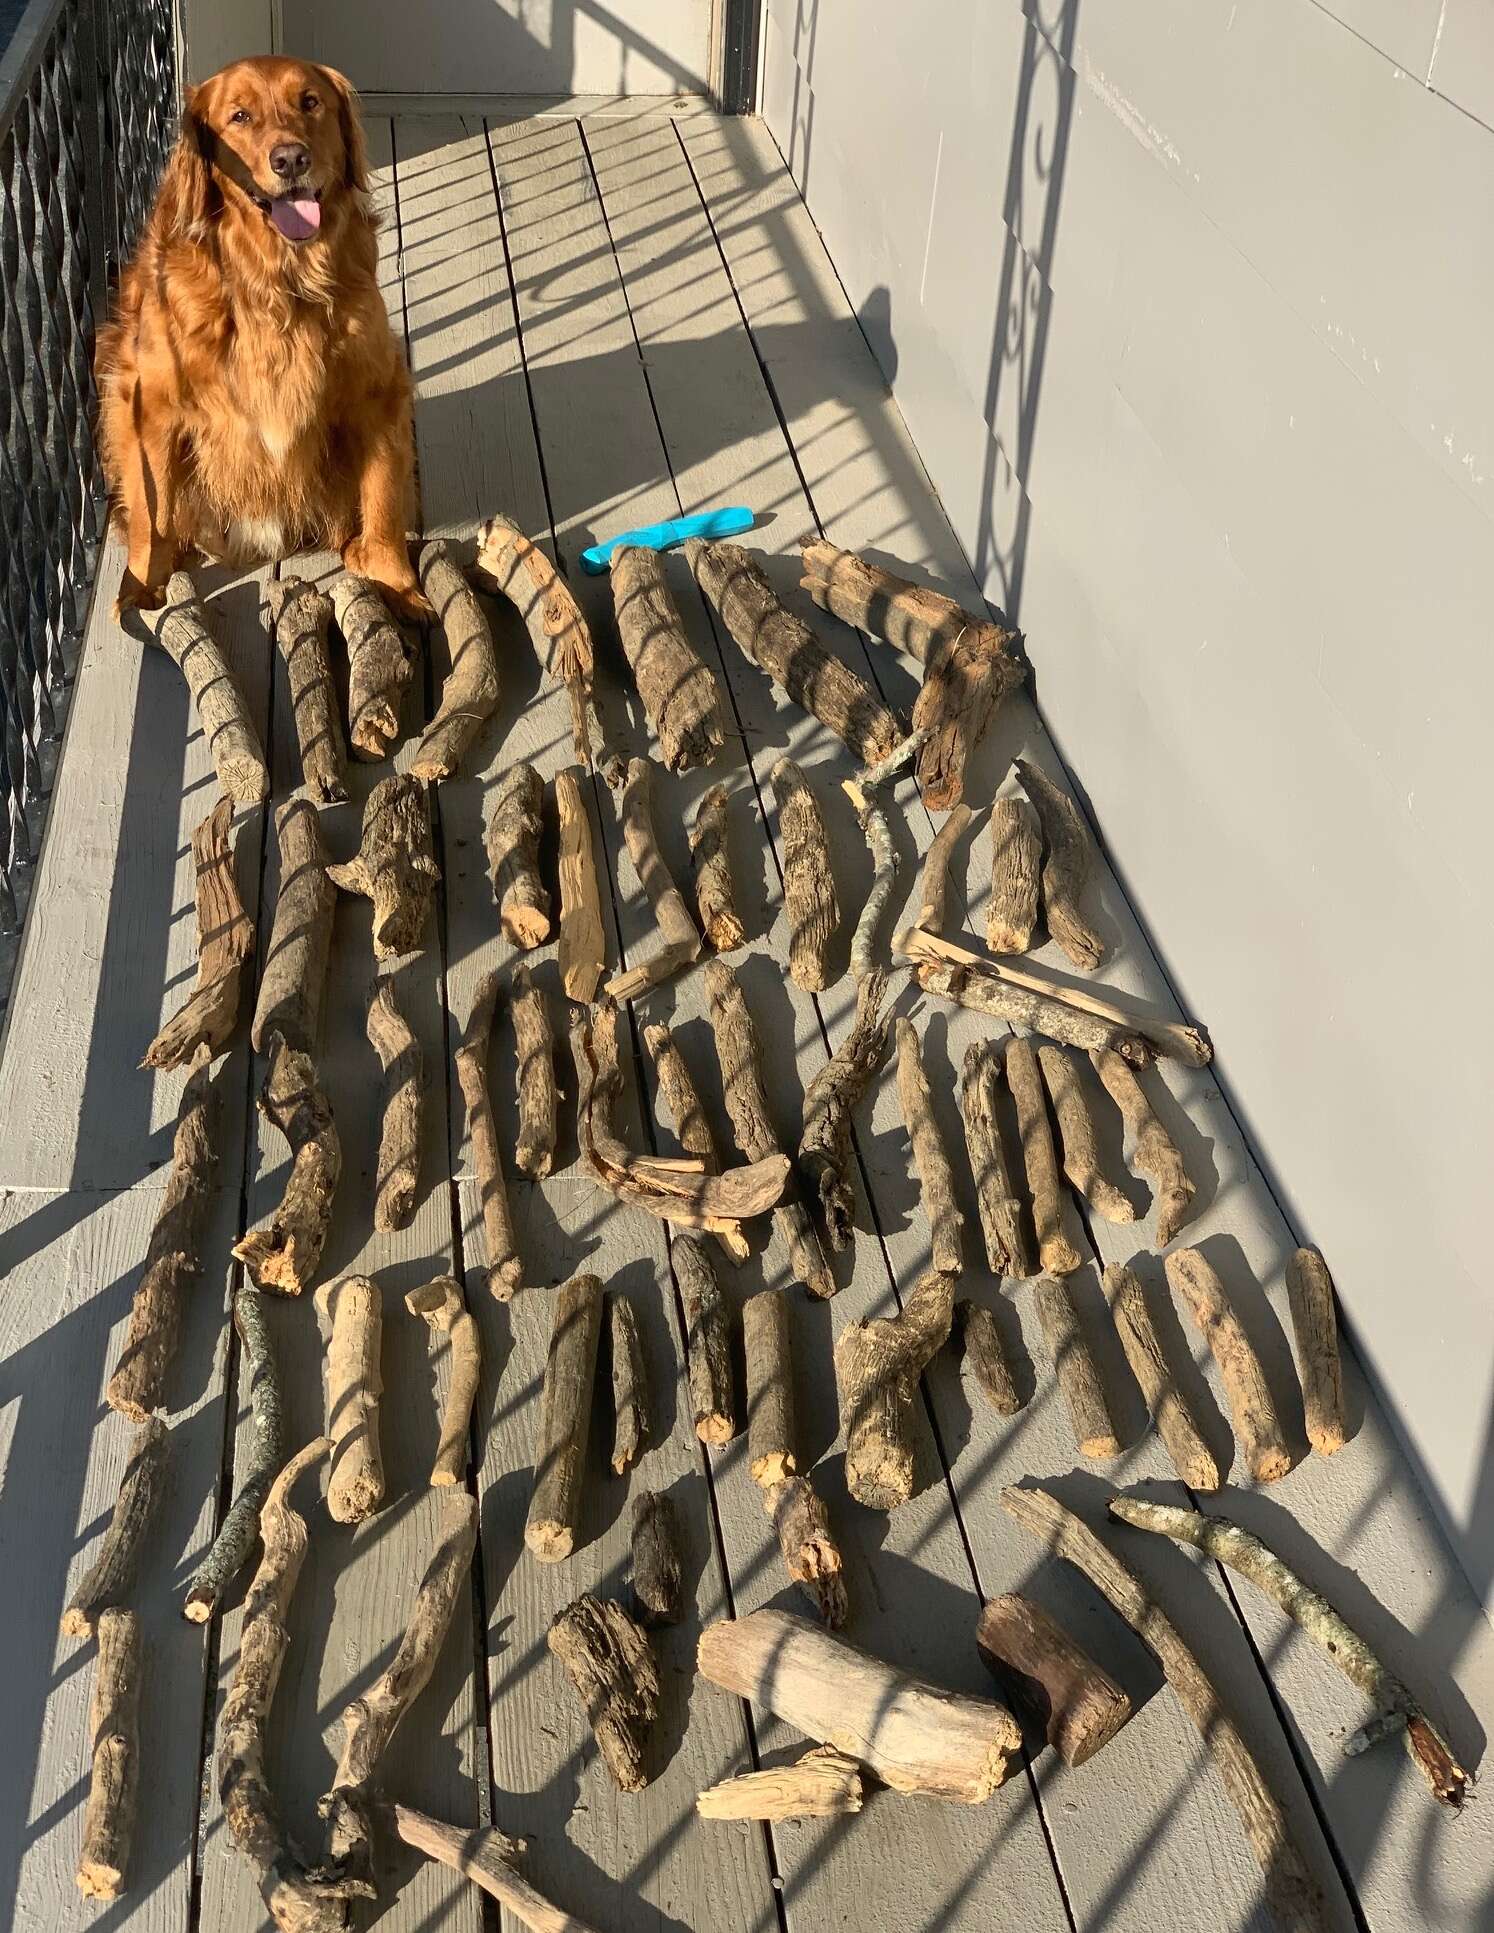 Dog shows off his collection of sticks